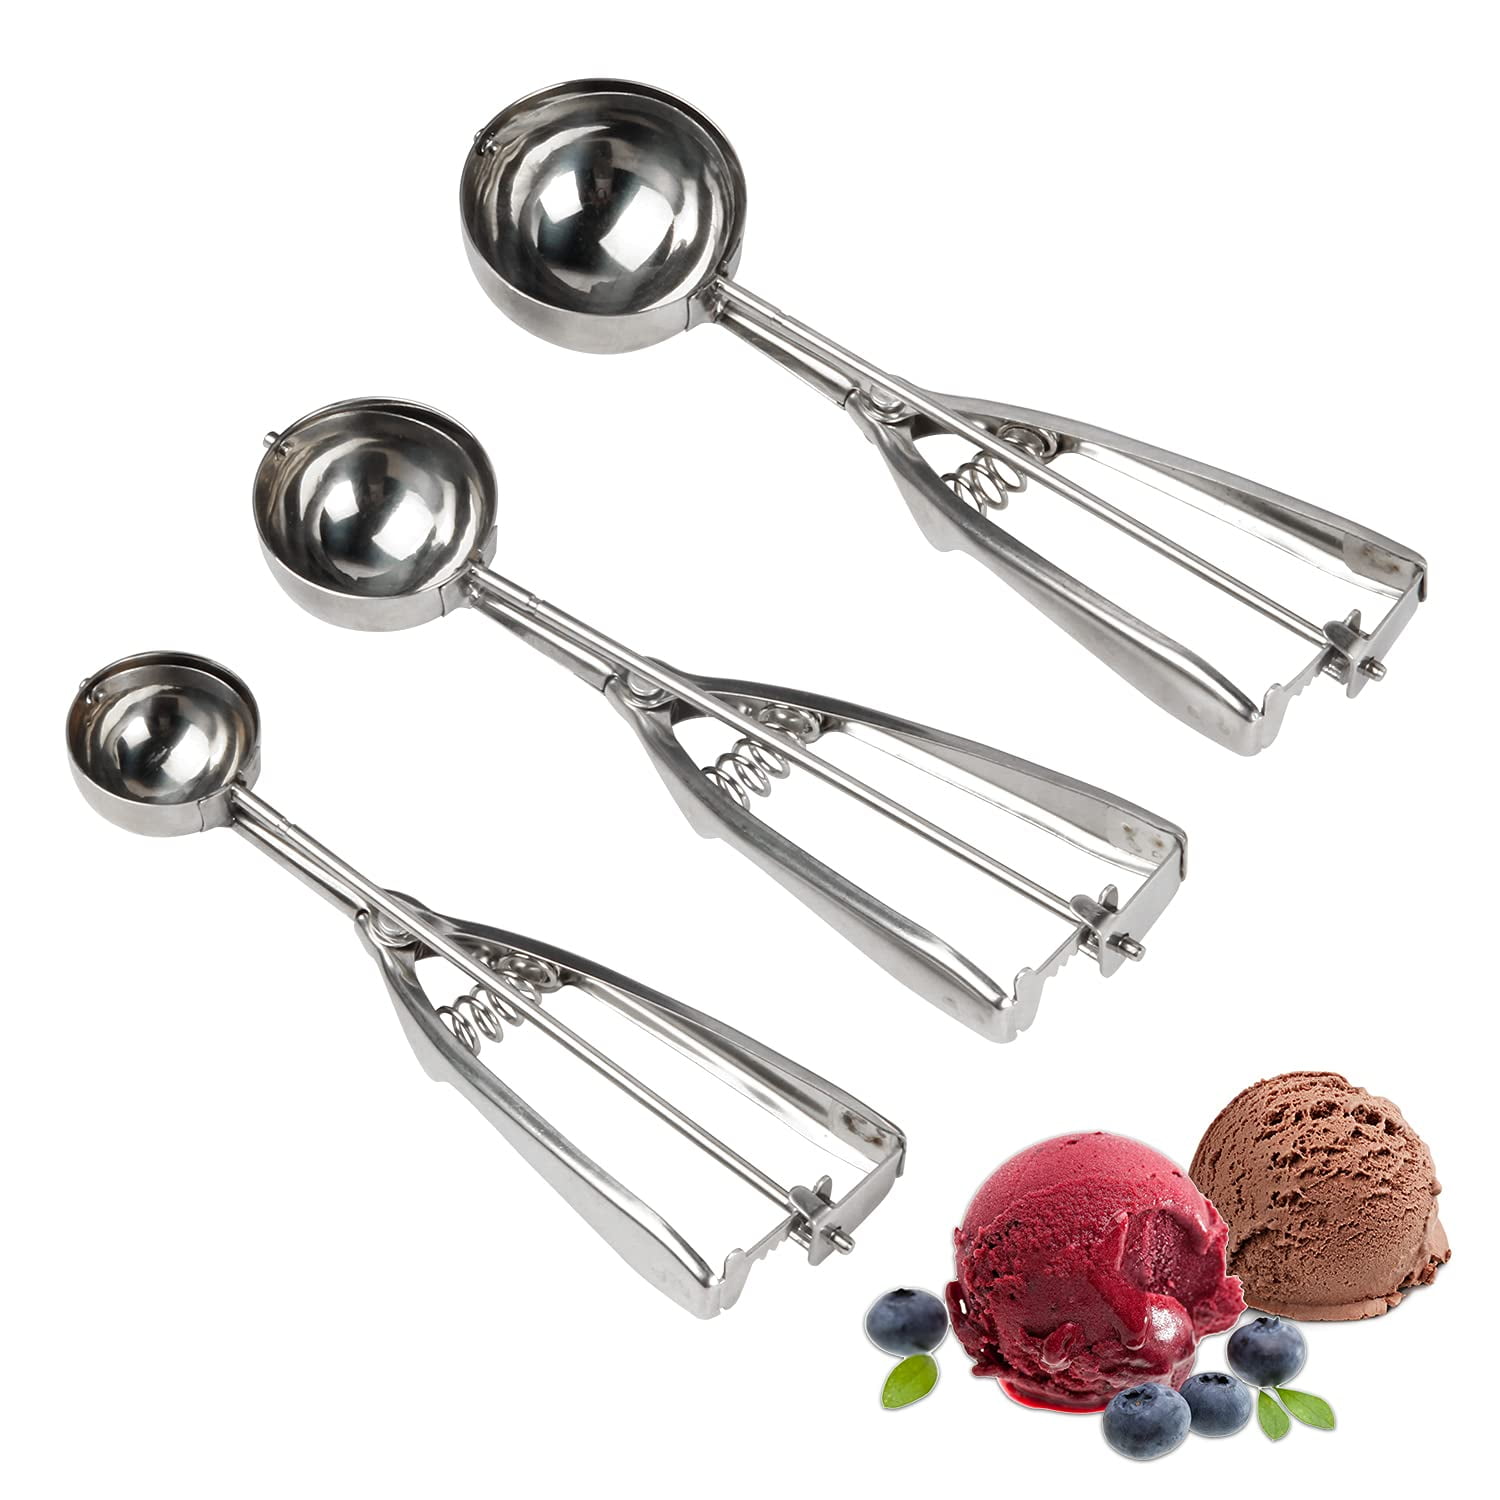 Cookie Scoops for Baking Set of 3, Ice Cream Scoop Set with Trigger  Stainless Steel Set Excellent for Melon Ball, Cupcake, Muffin, Meatball,  Include